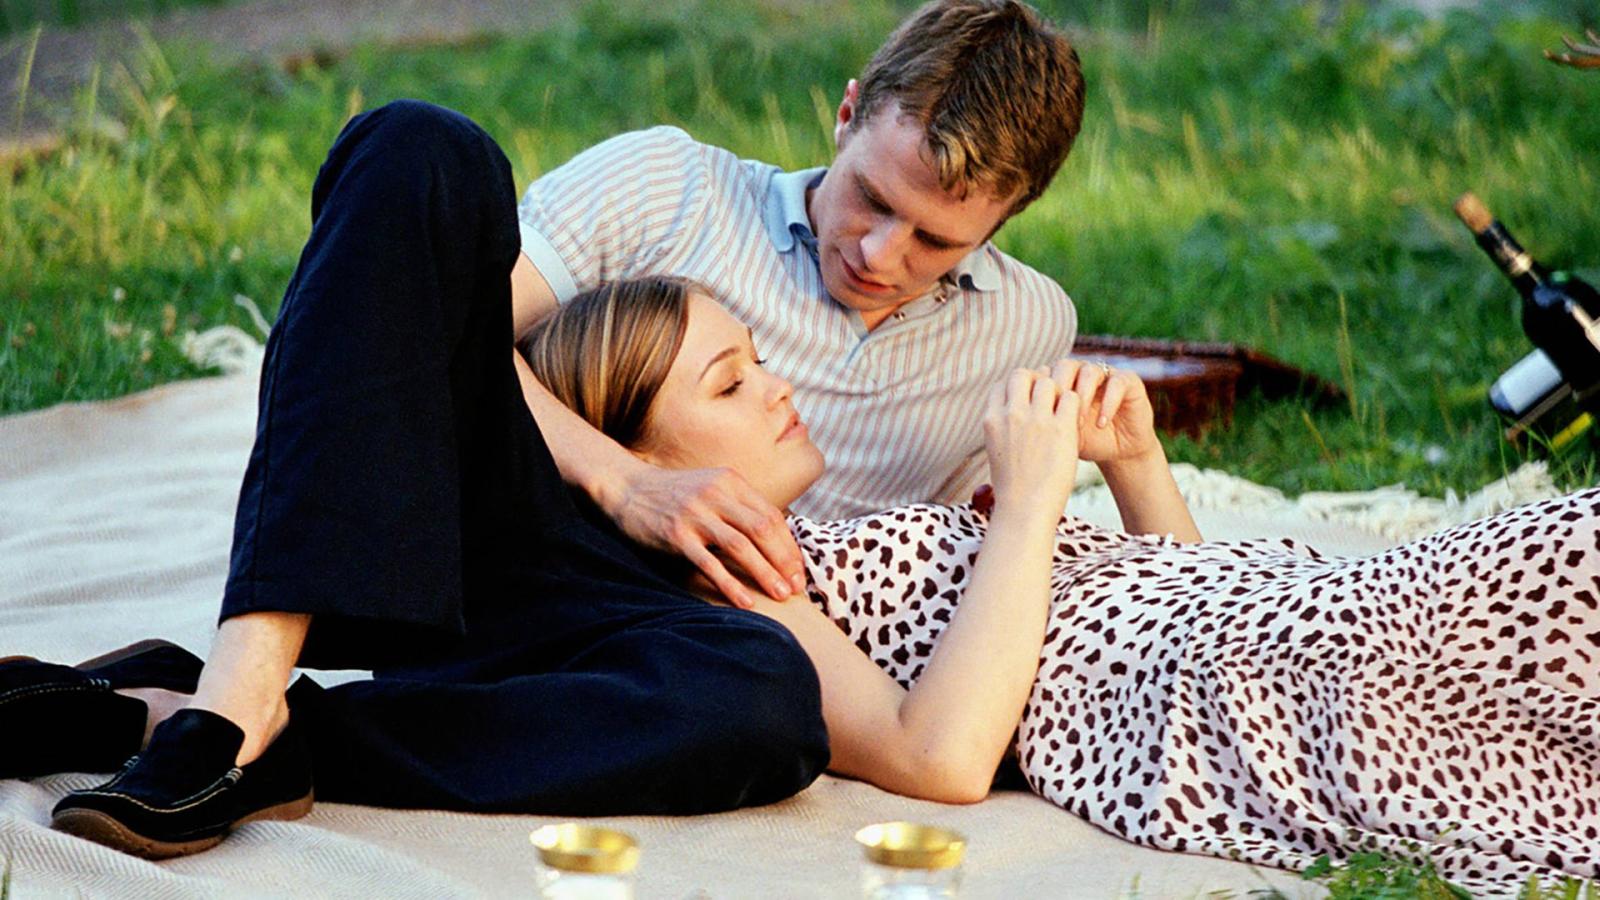 15 Romance Movies from the 2000s So Bad, They're Actually Good - image 8